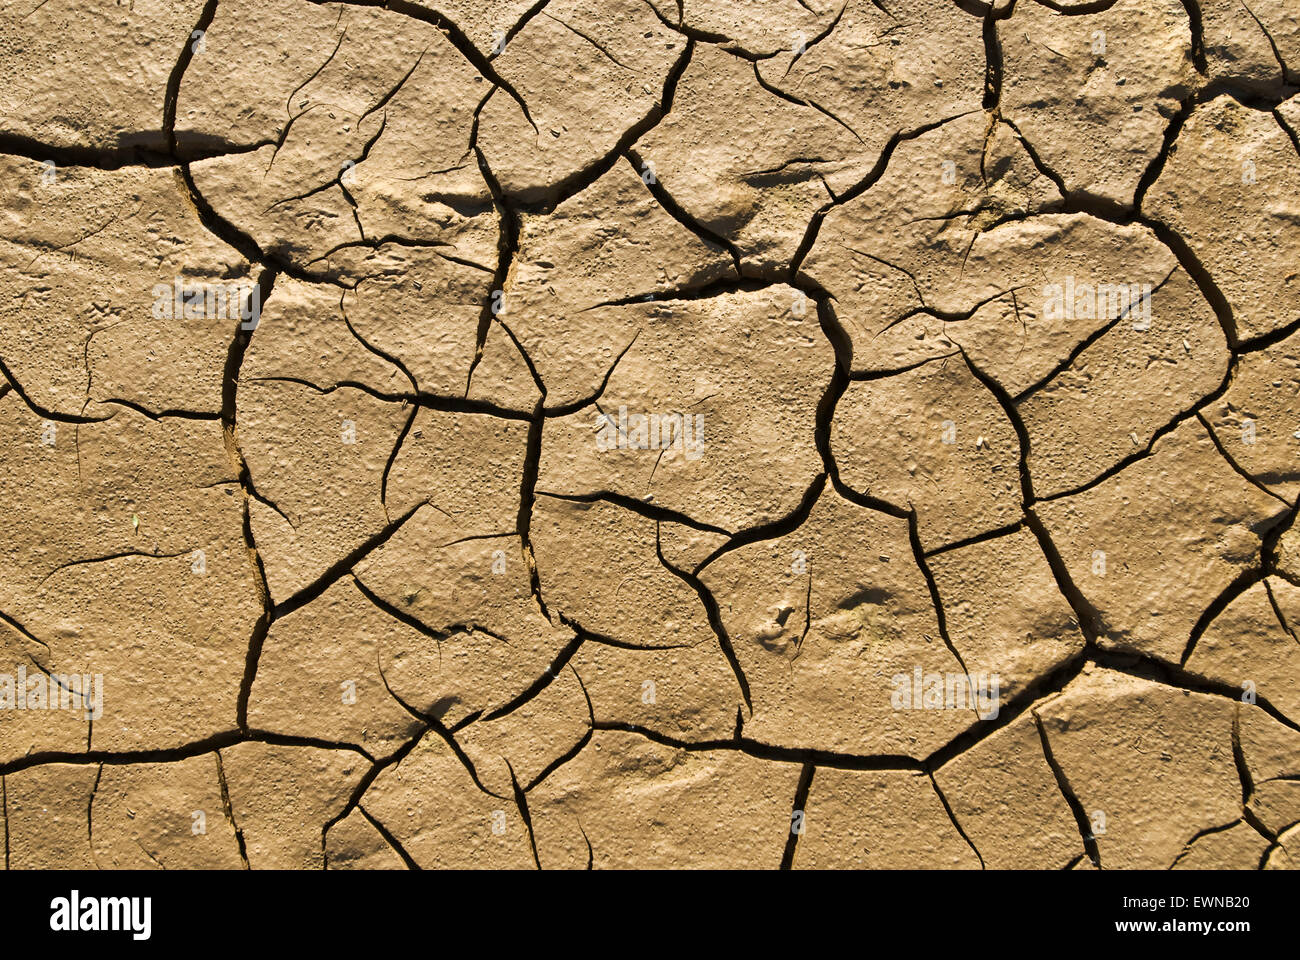 Dried mud dryness rifts flaws Stock Photo